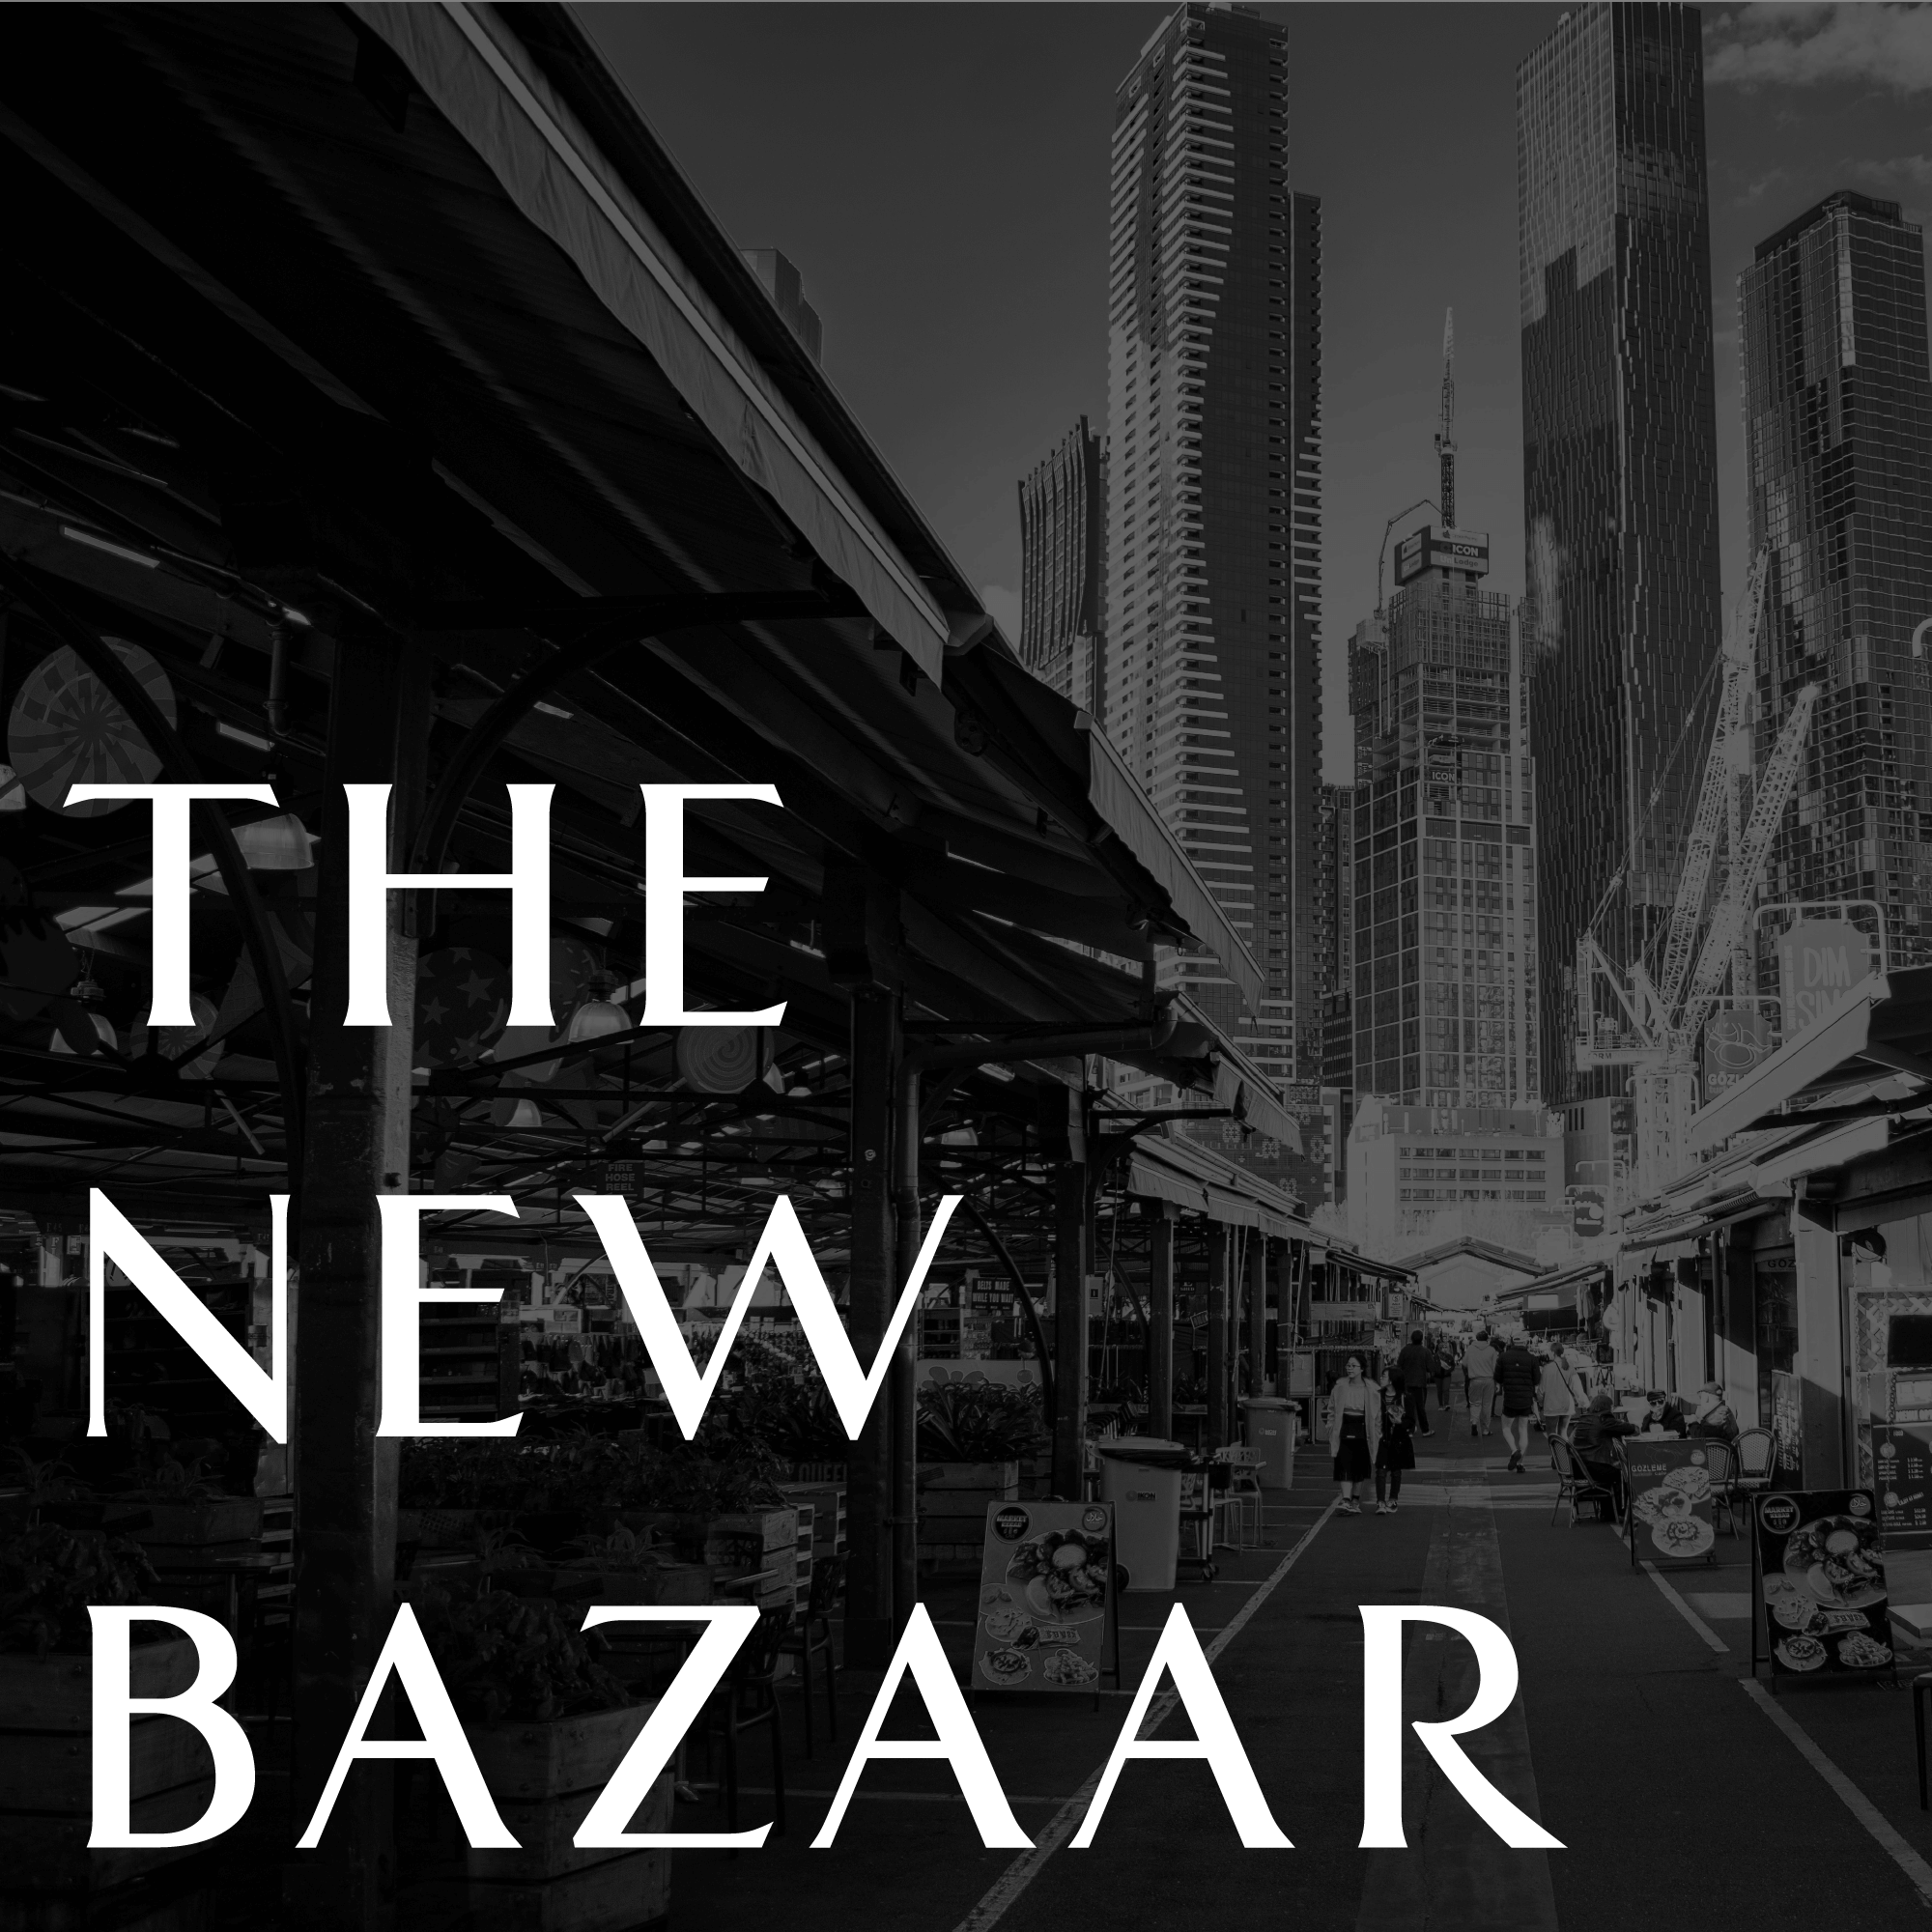 In The Newswalllah's Bazaar, You Might Be The One Being Sold